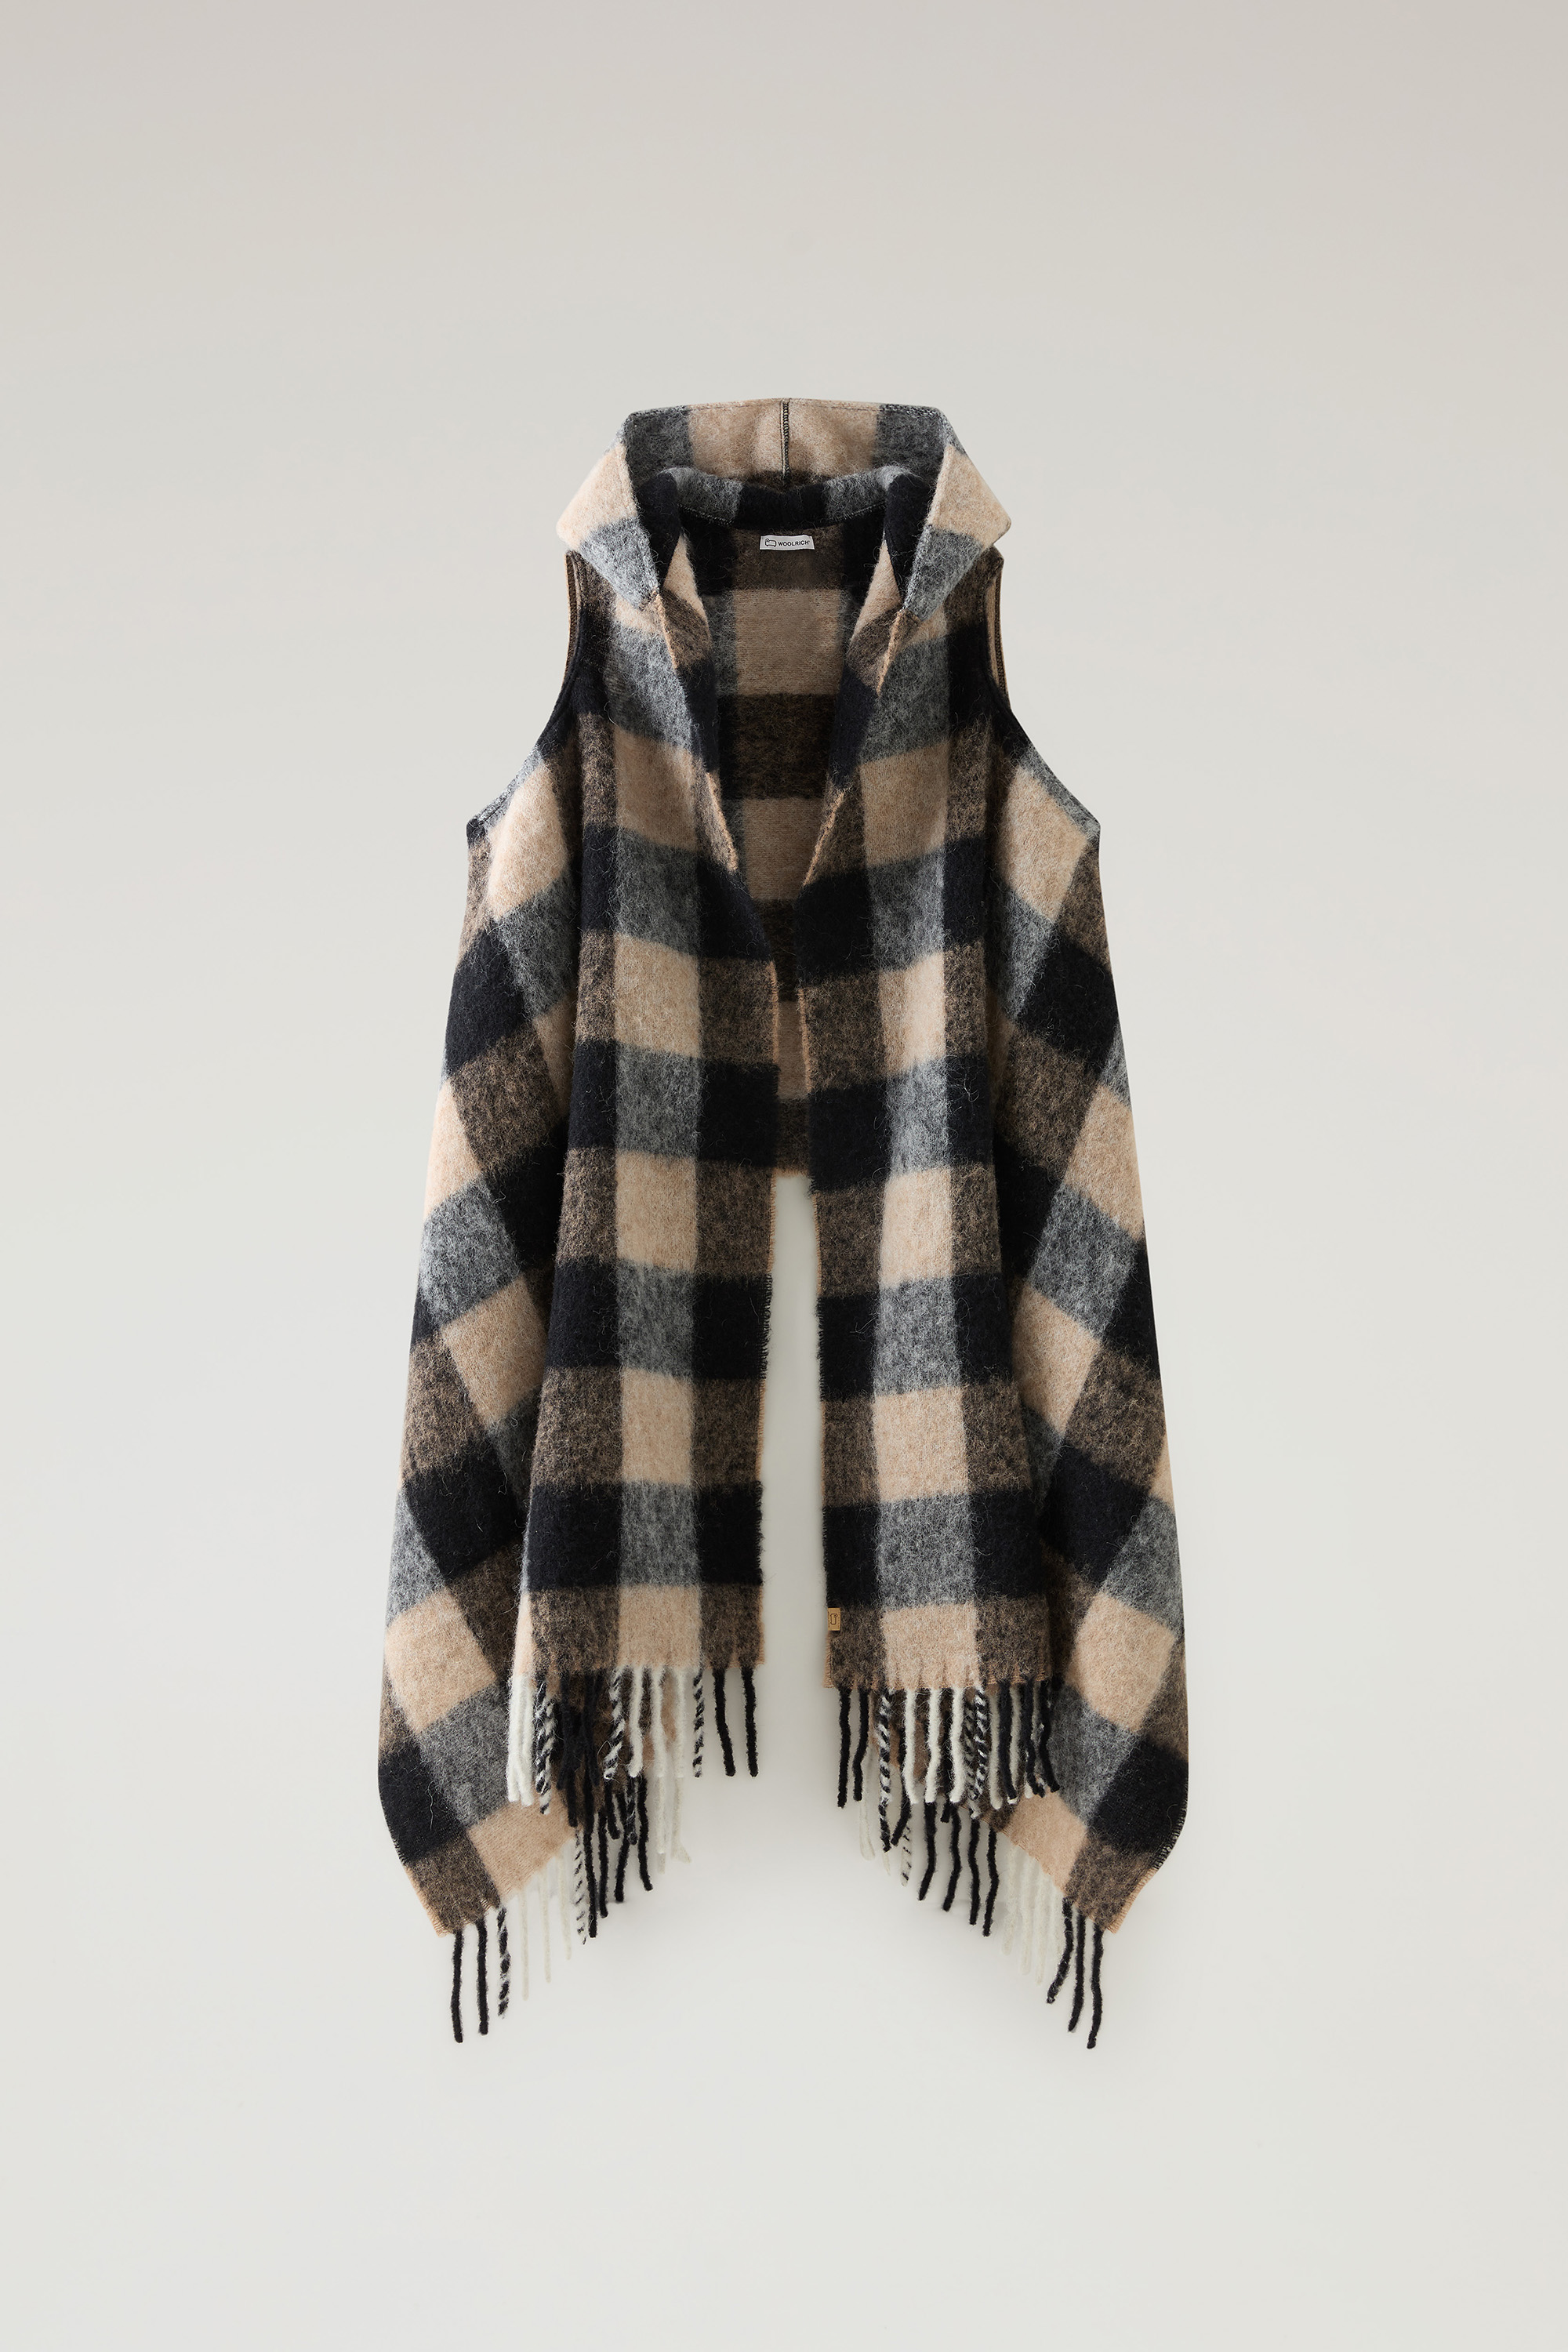 HOODED WOOL CAPE SCARF